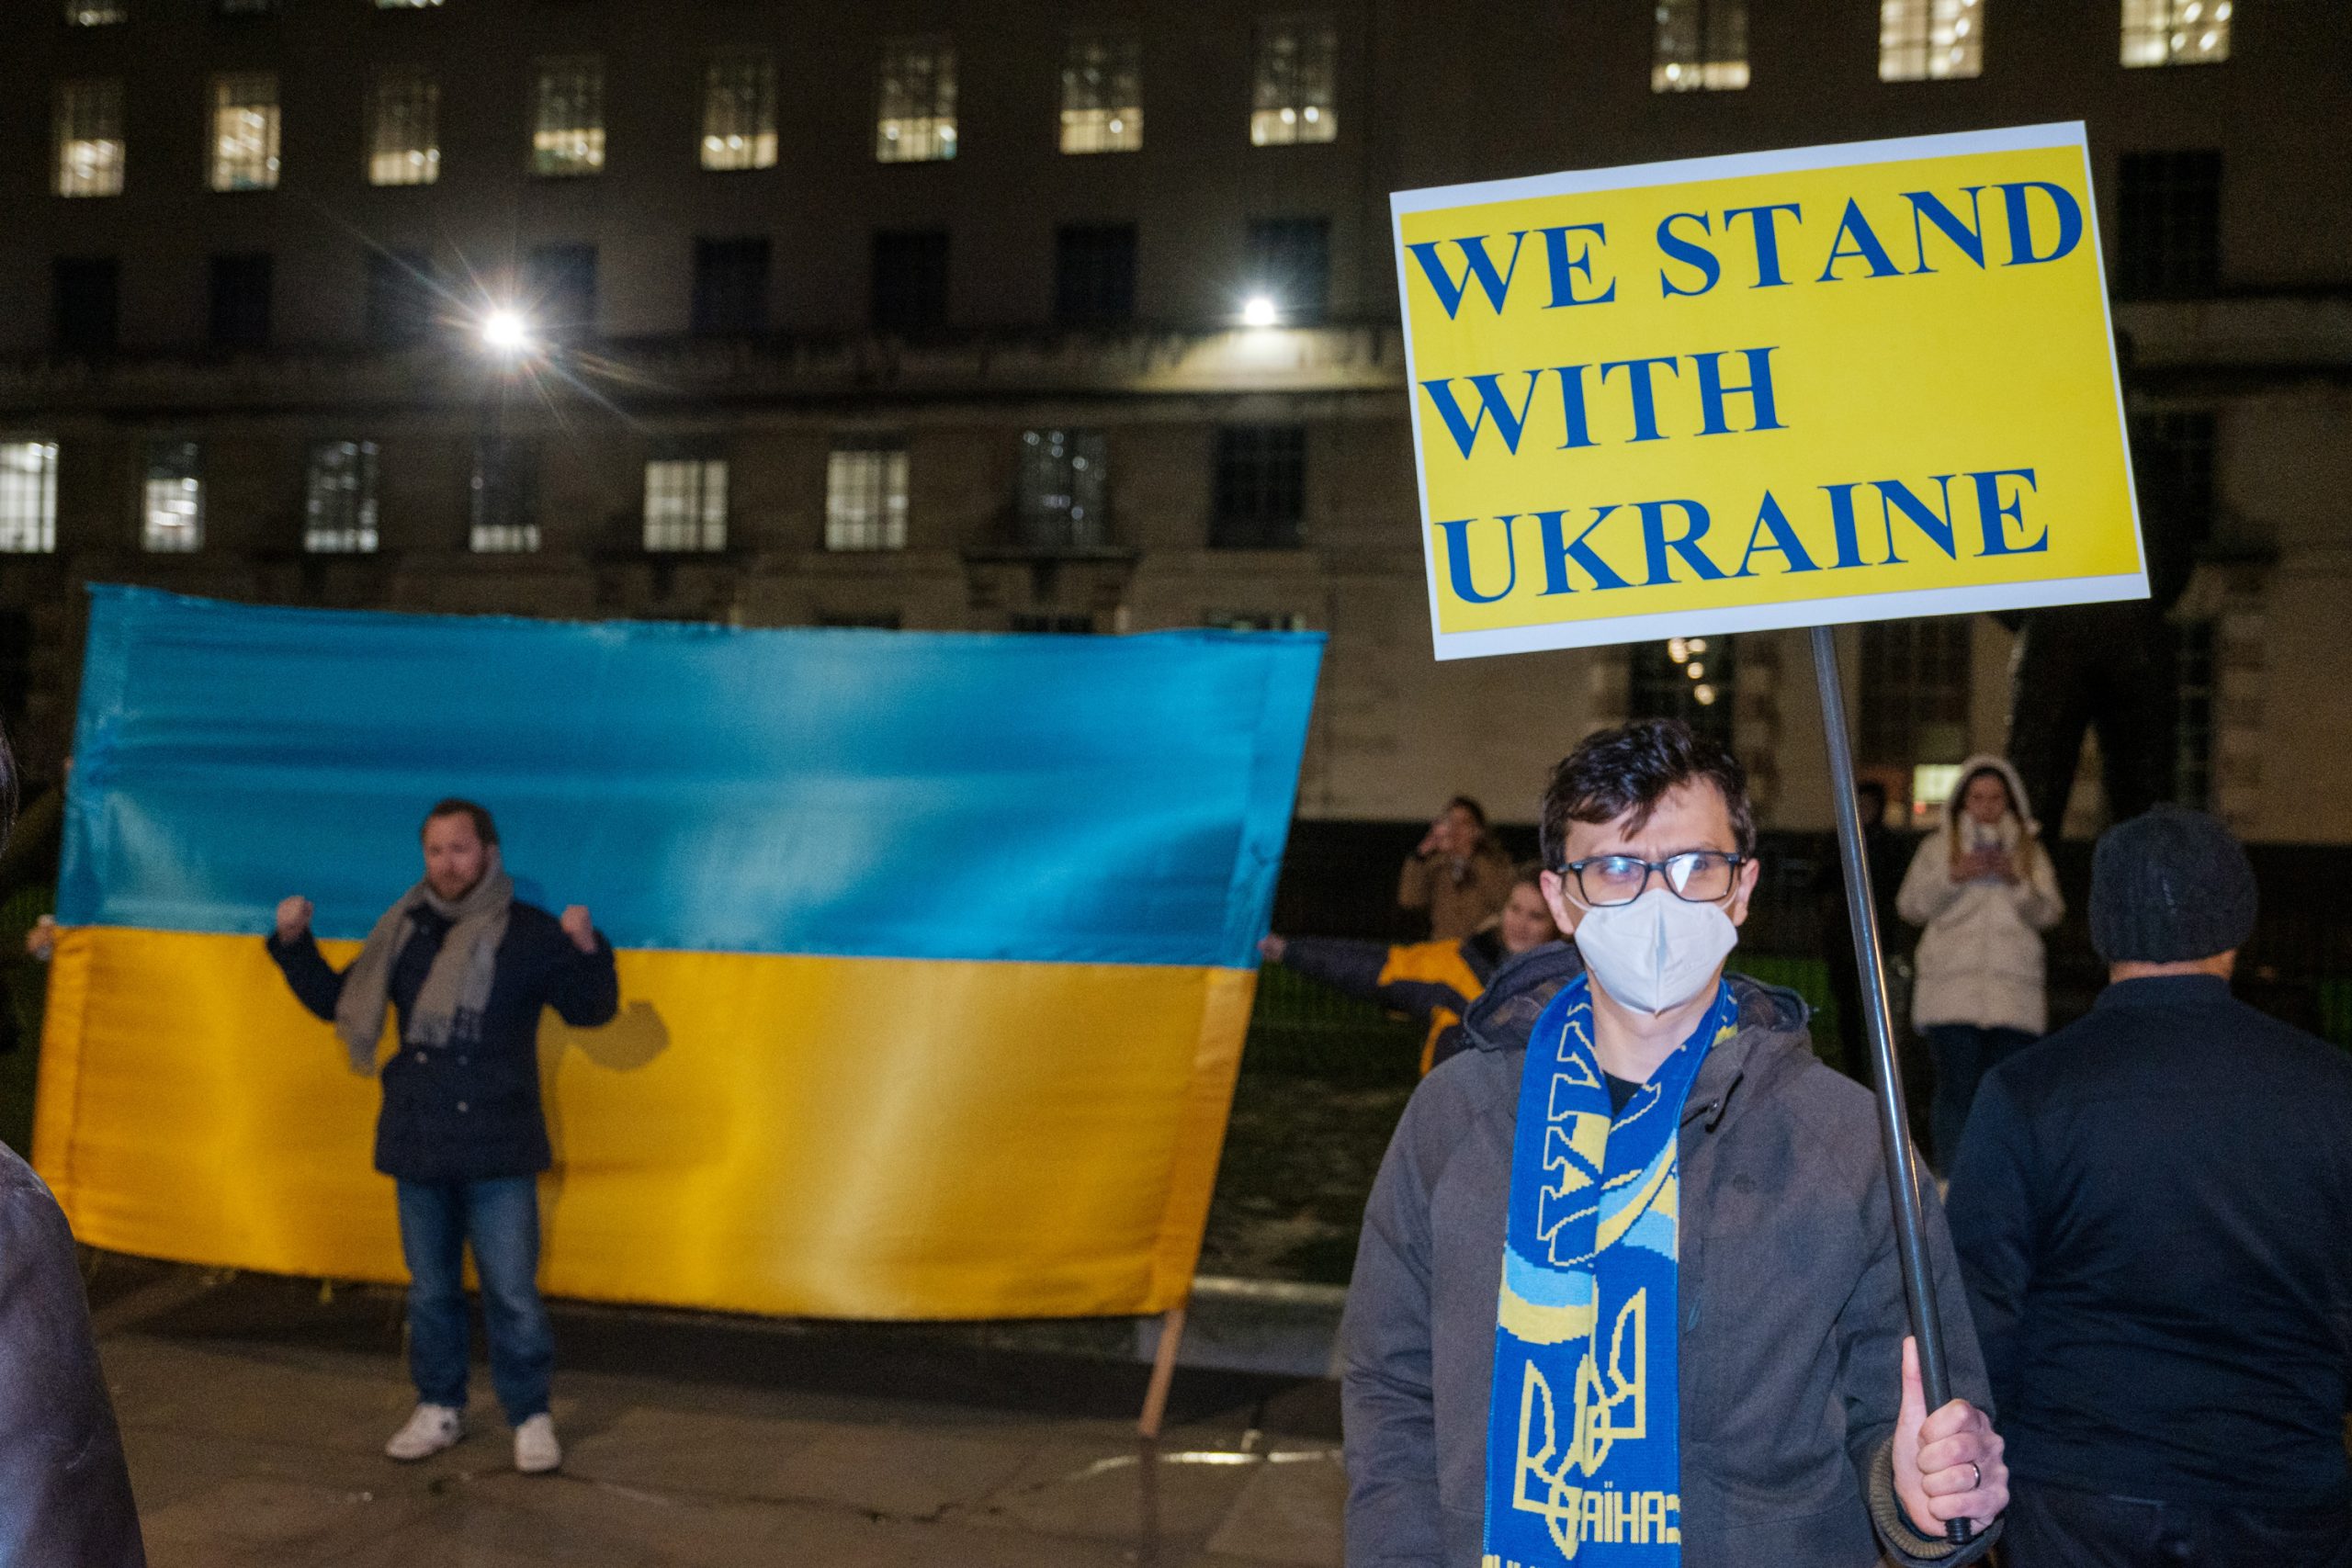 Men protesting in the UK with a large Ukrainian flag and a sigh that says WE STAND WITH UKRAINE. Image by Ehimetalor Akhere Unuabona.